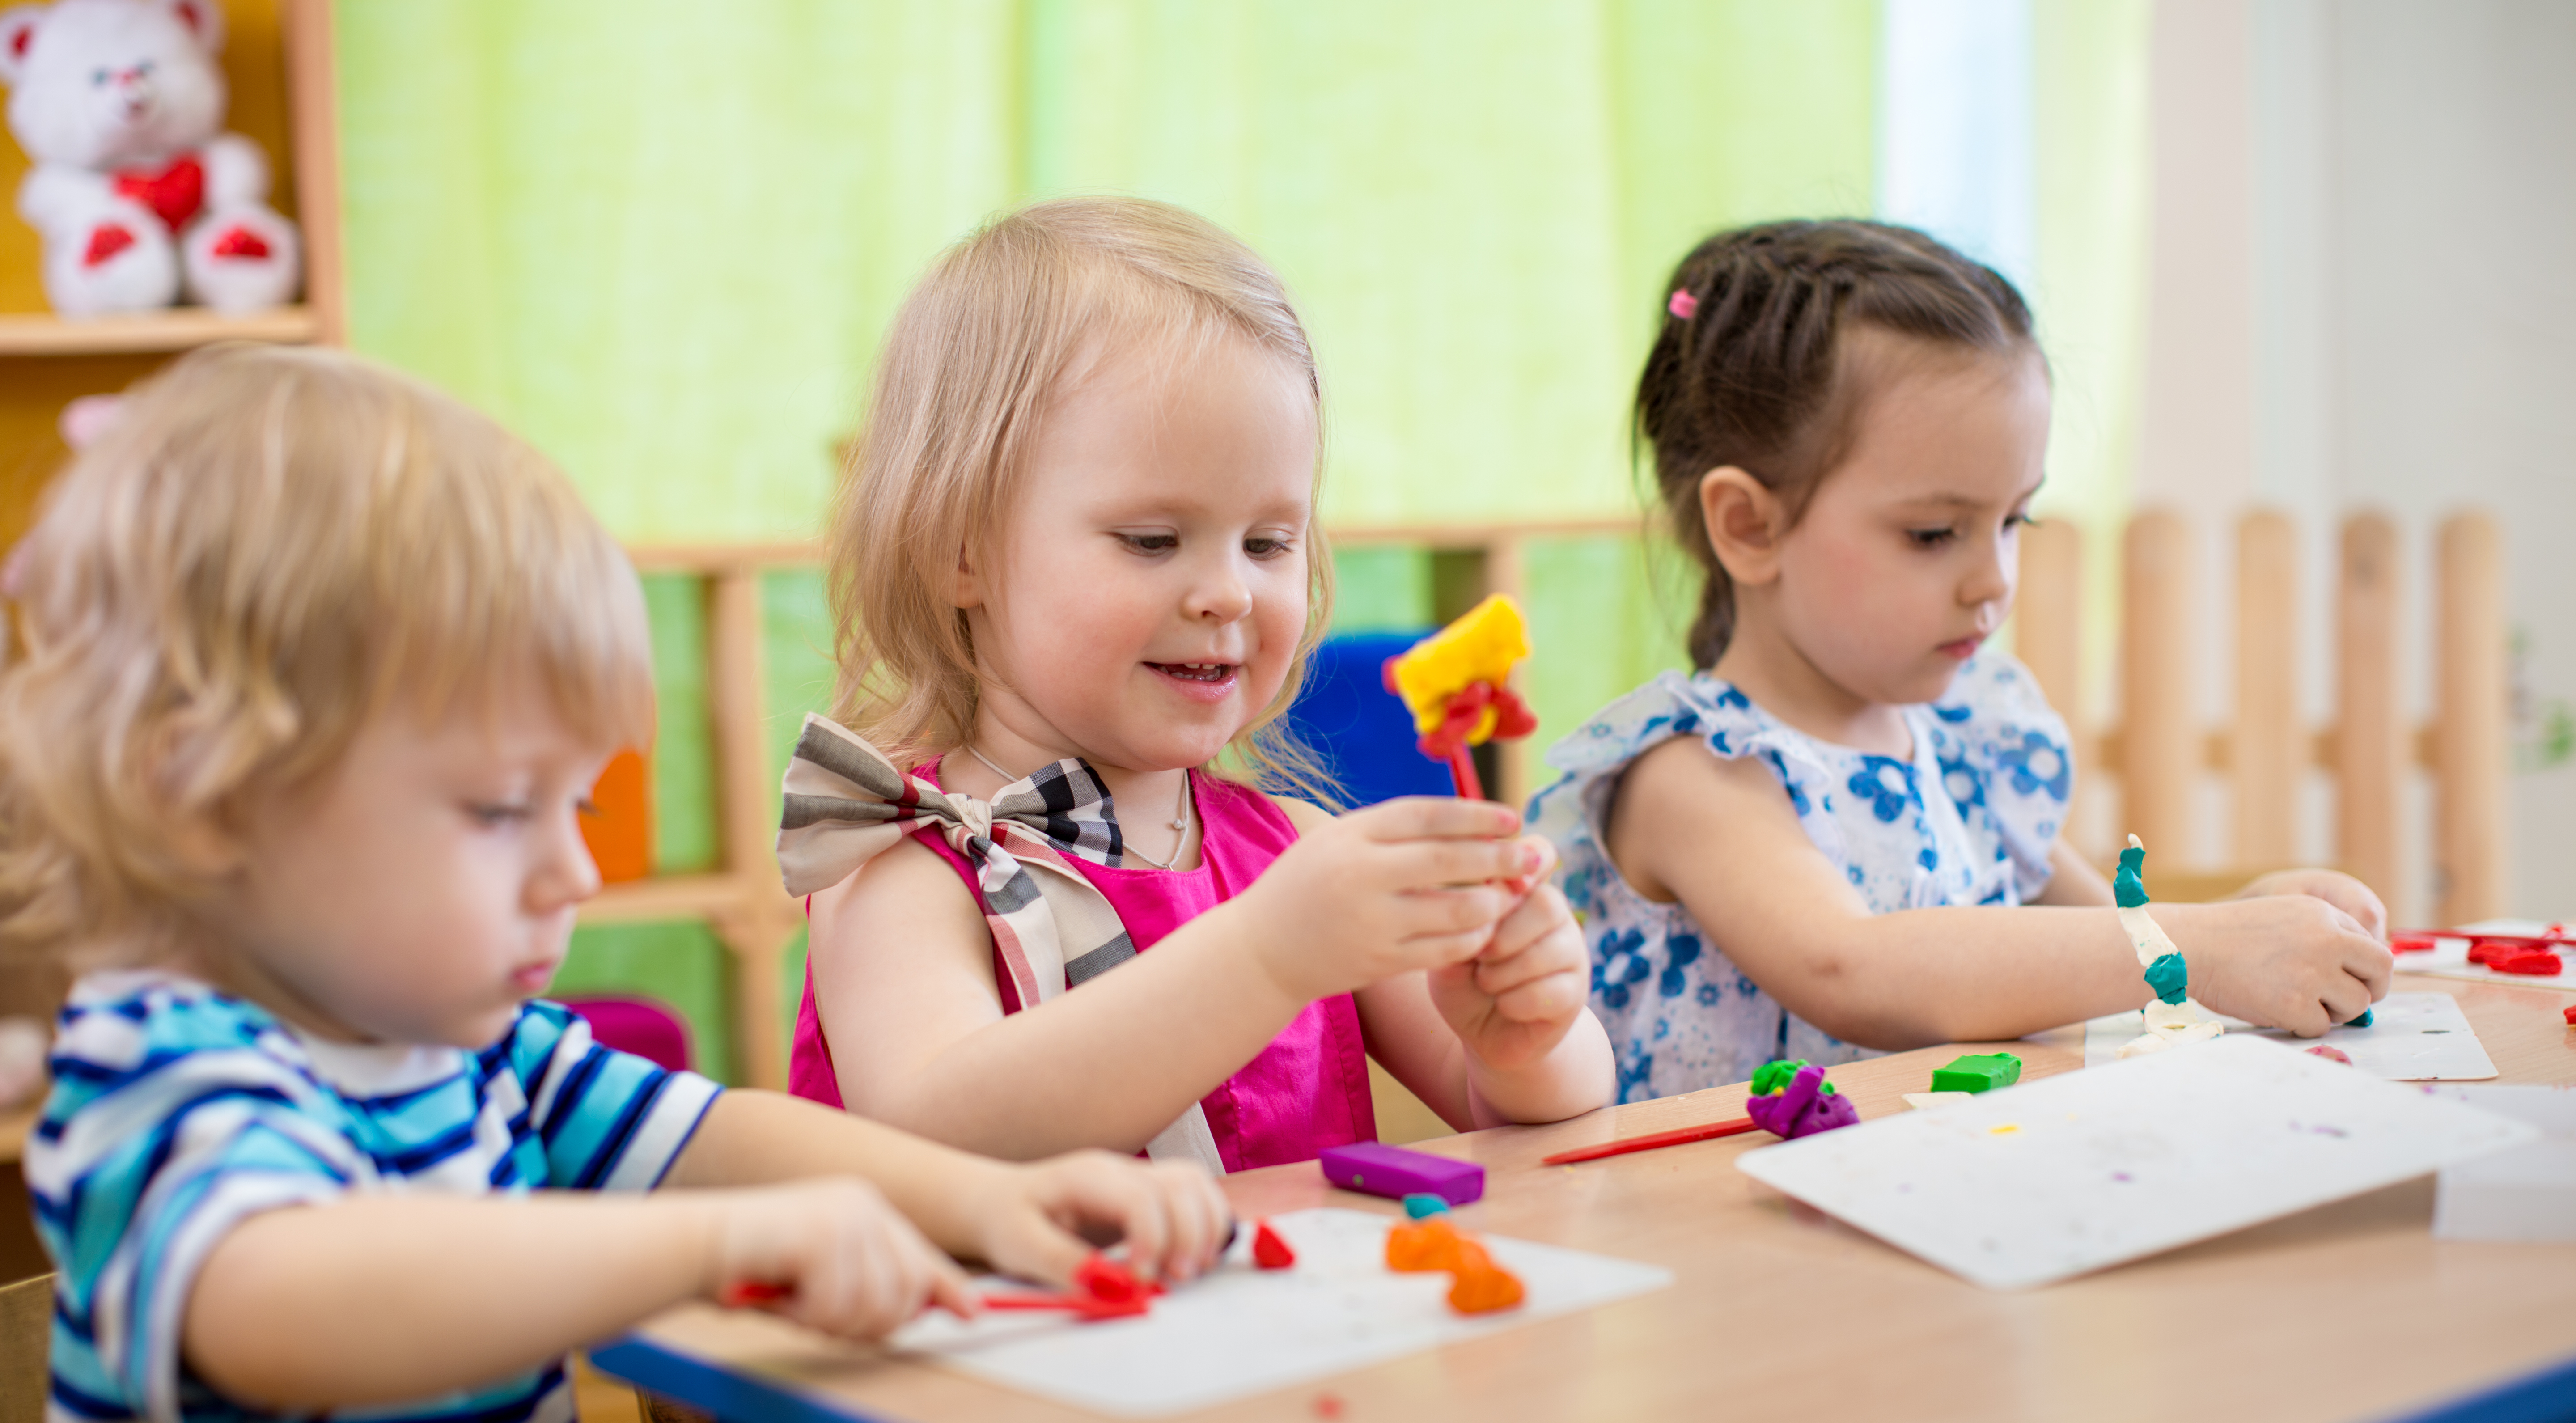 Children making arts and crafts in daycare